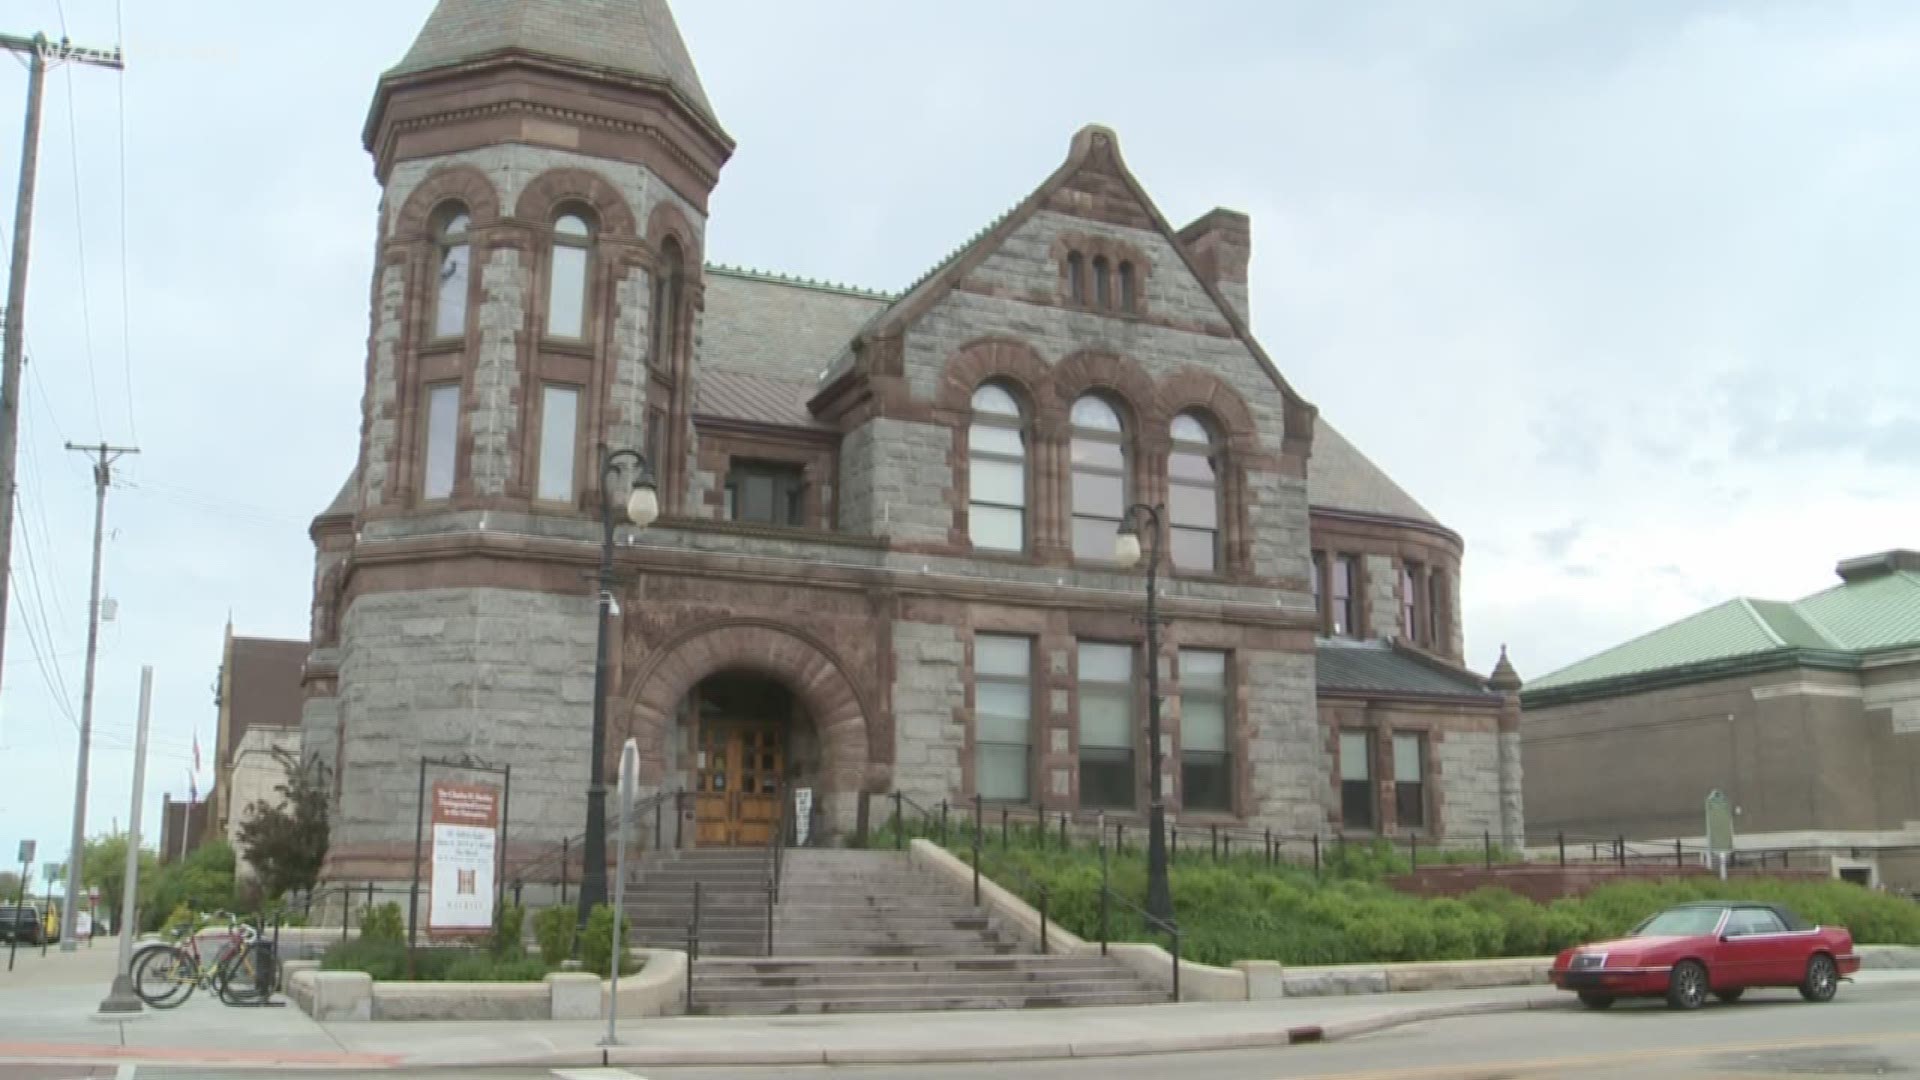 Starting this Thursday, June 6, and every Thursday in June the public will have the chance to dive into Hackley Public Library’s history and learn fascinating stories and details about the space that opened in 1890.